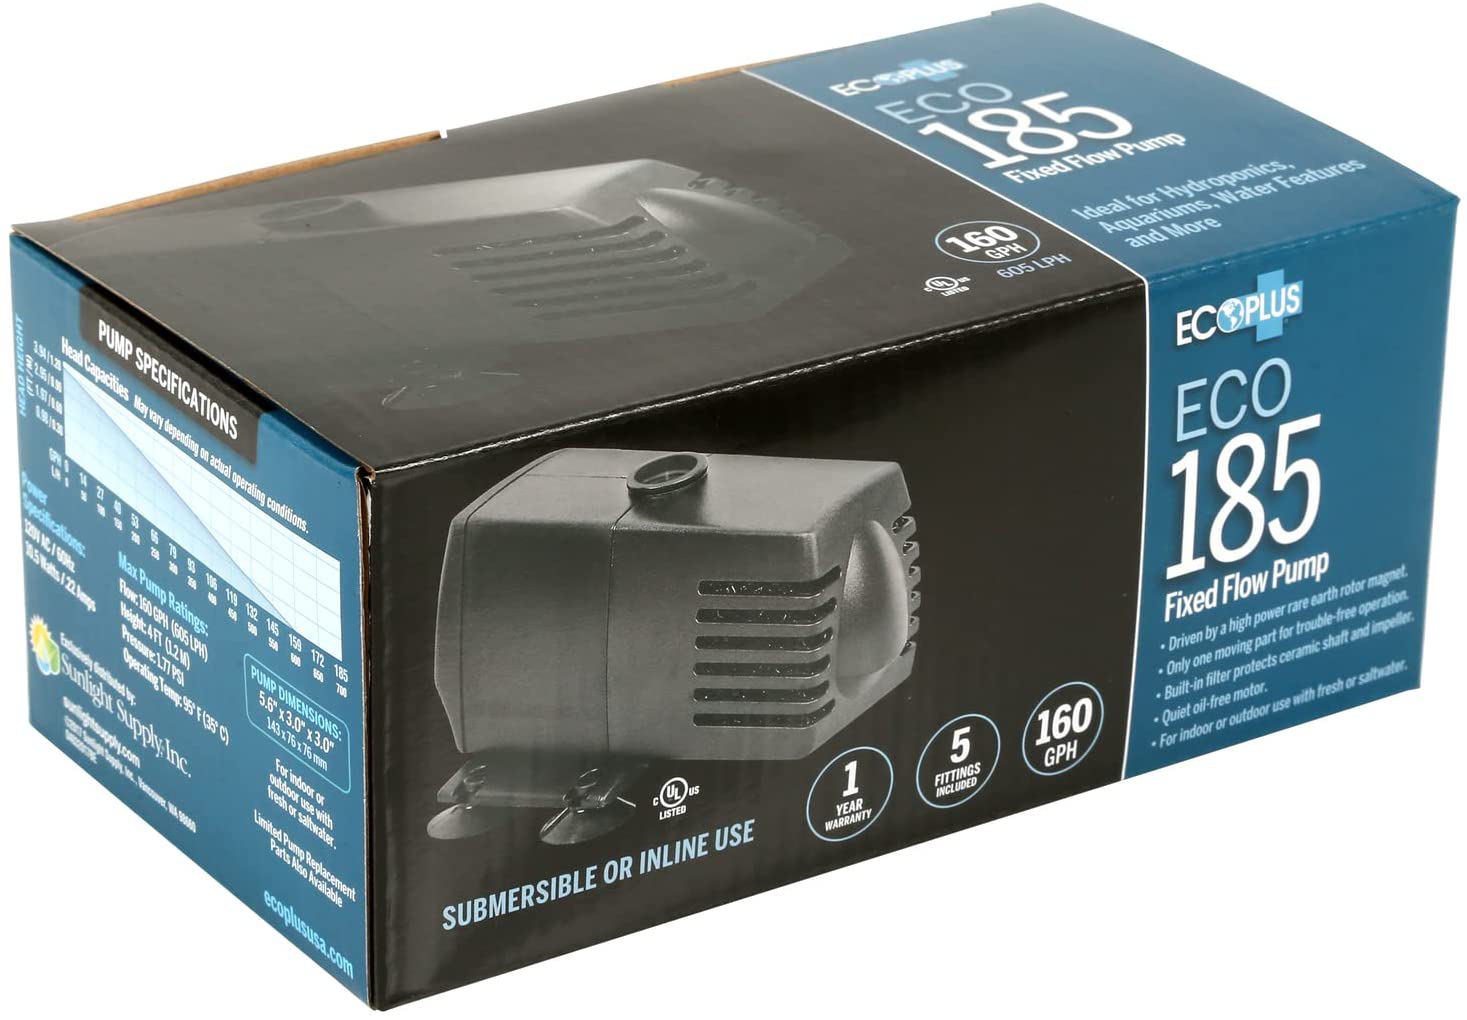 Ecoplus Eco 185 Water Pump Fixed Flow Submersible or Inline for Aquariums, Ponds, Fountains & Hydroponics - UL Listed, 158 GPH, Black Animals & Pet Supplies > Pet Supplies > Fish Supplies > Aquarium & Pond Tubing Ecoplus Ink   